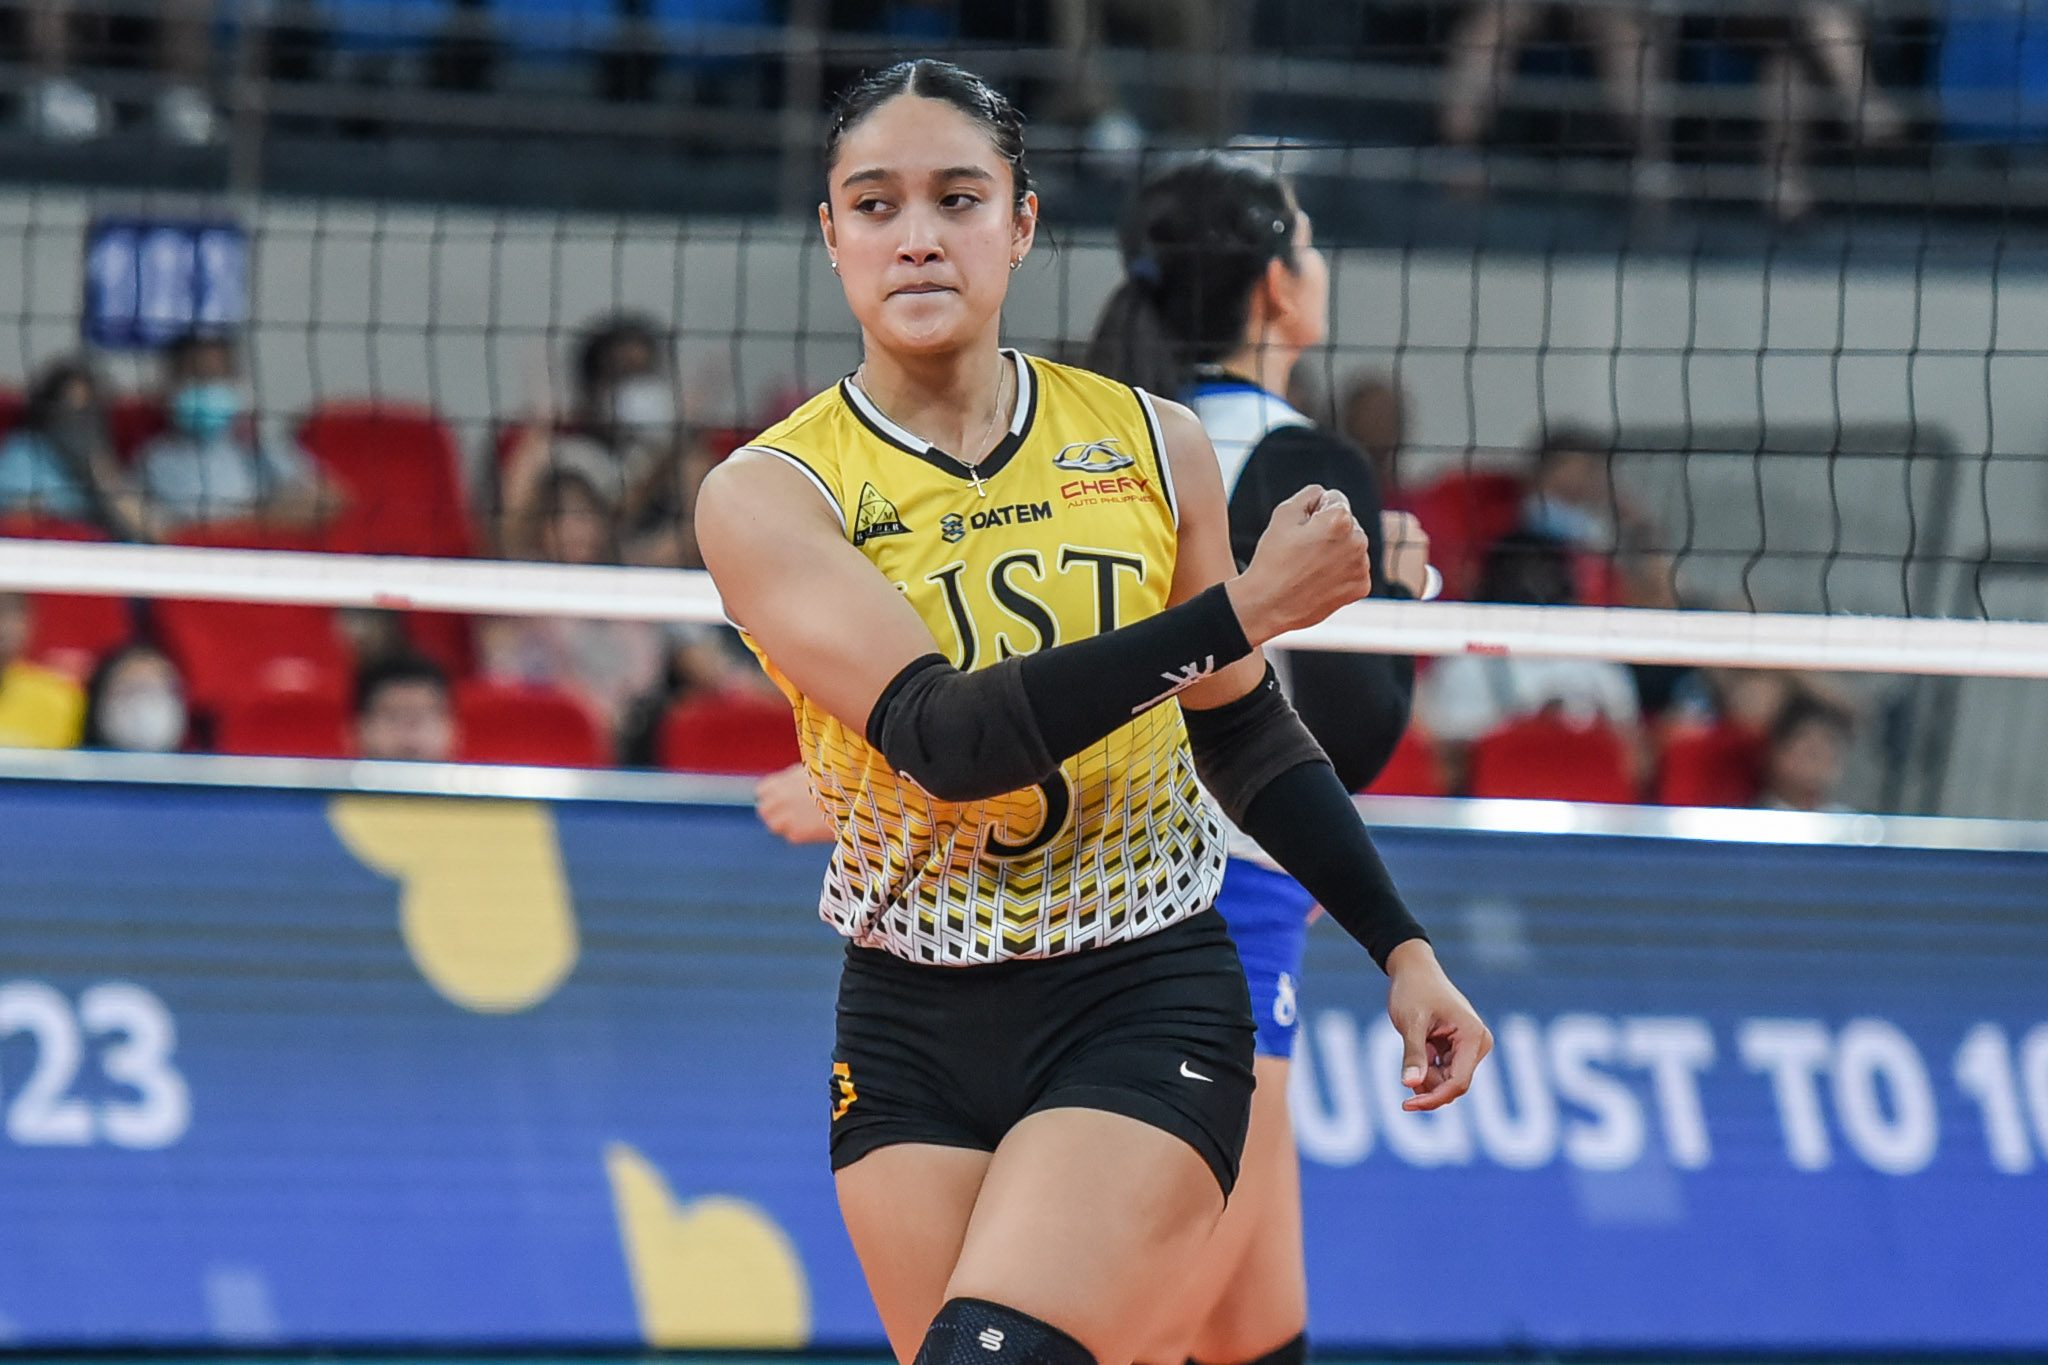 UST’s Imee Hernandez erupts for UAAP career-high 24, earns Player of the Week nod